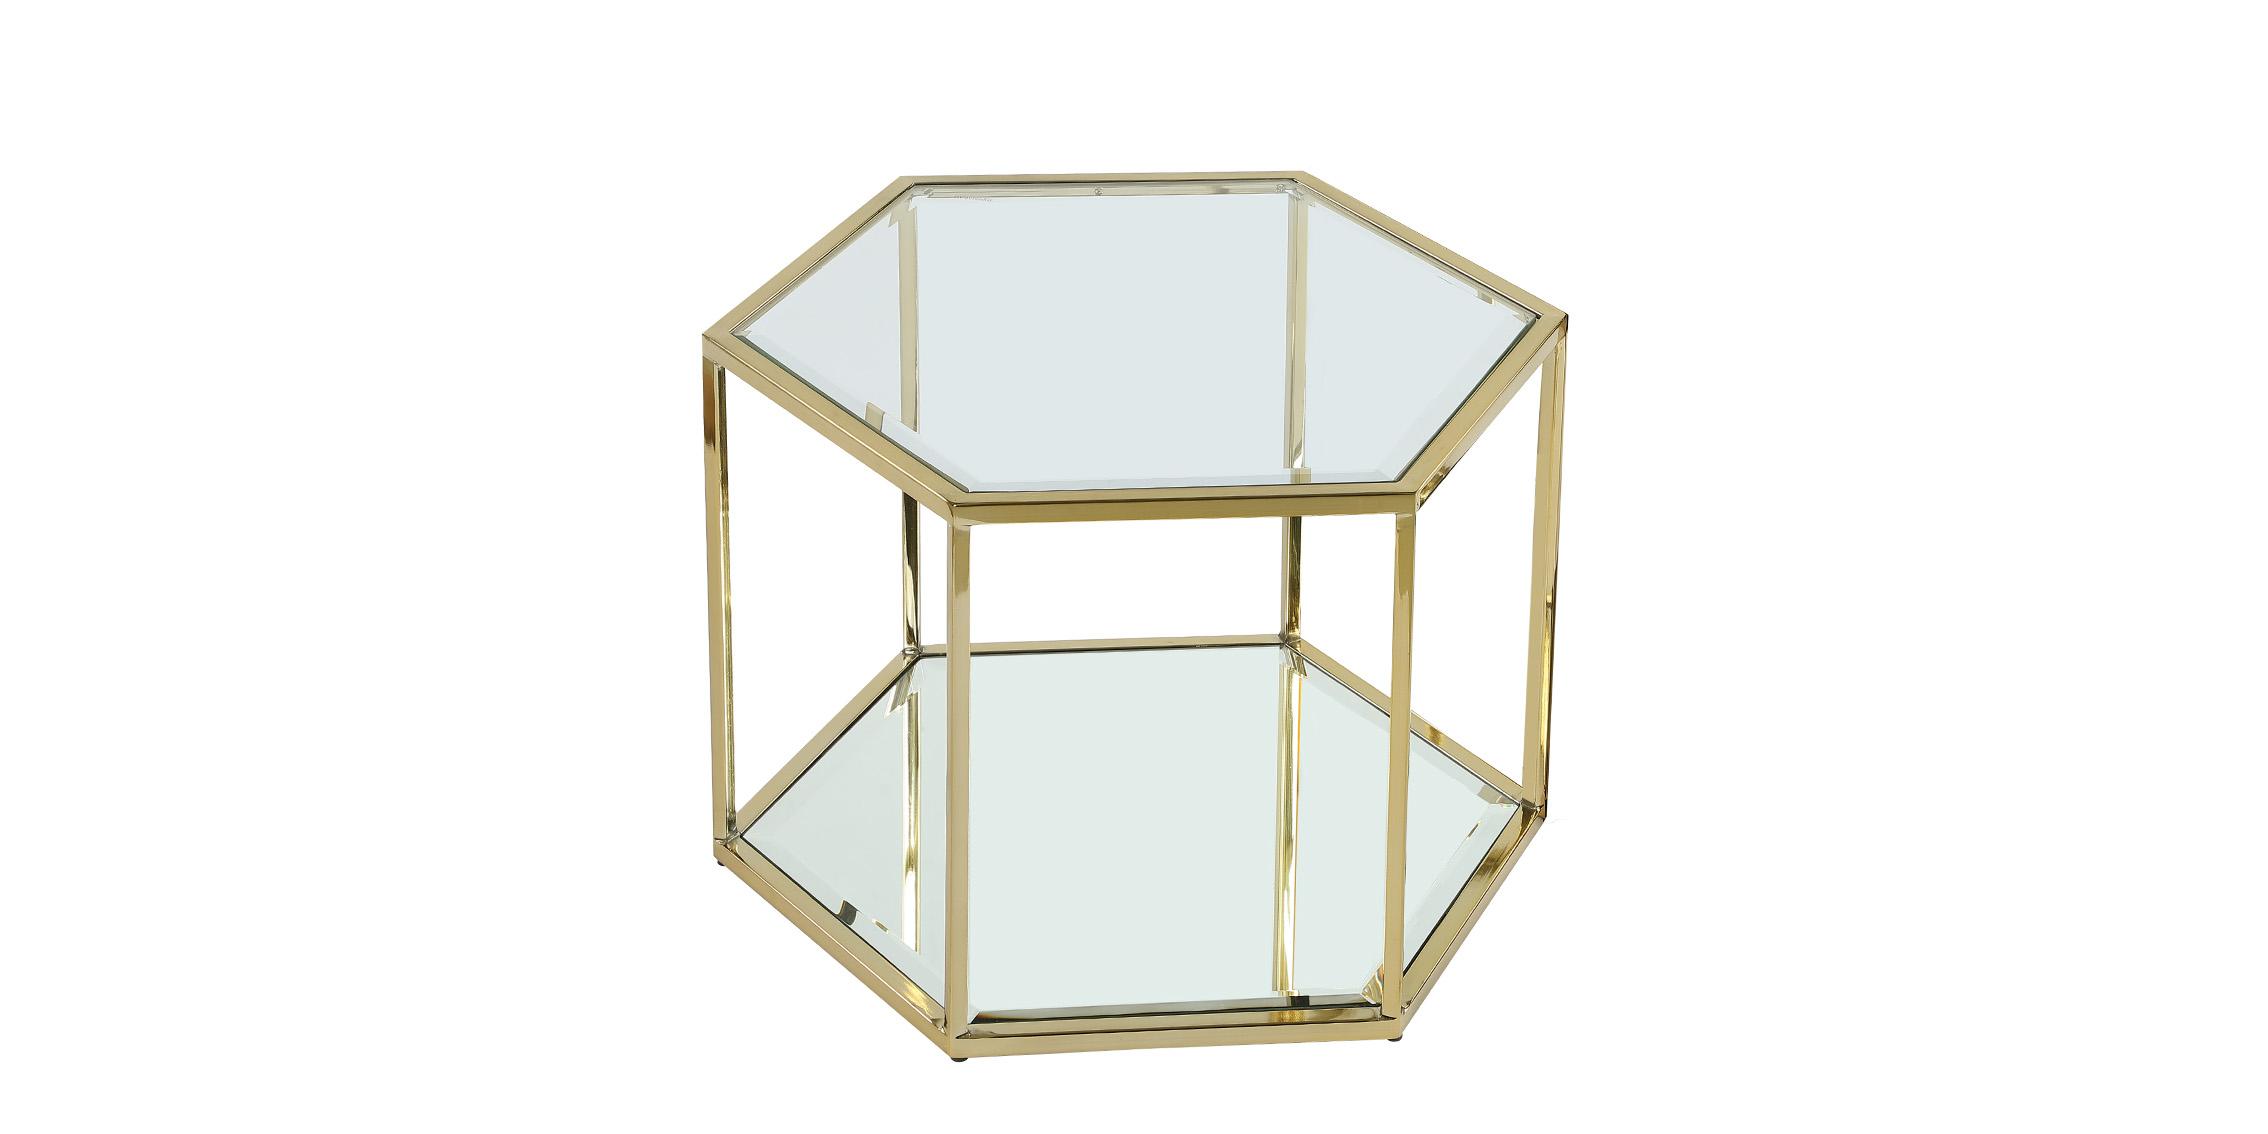 Contemporary, Modern Coffee Table SEI 205-CT 205-CT in Gold 